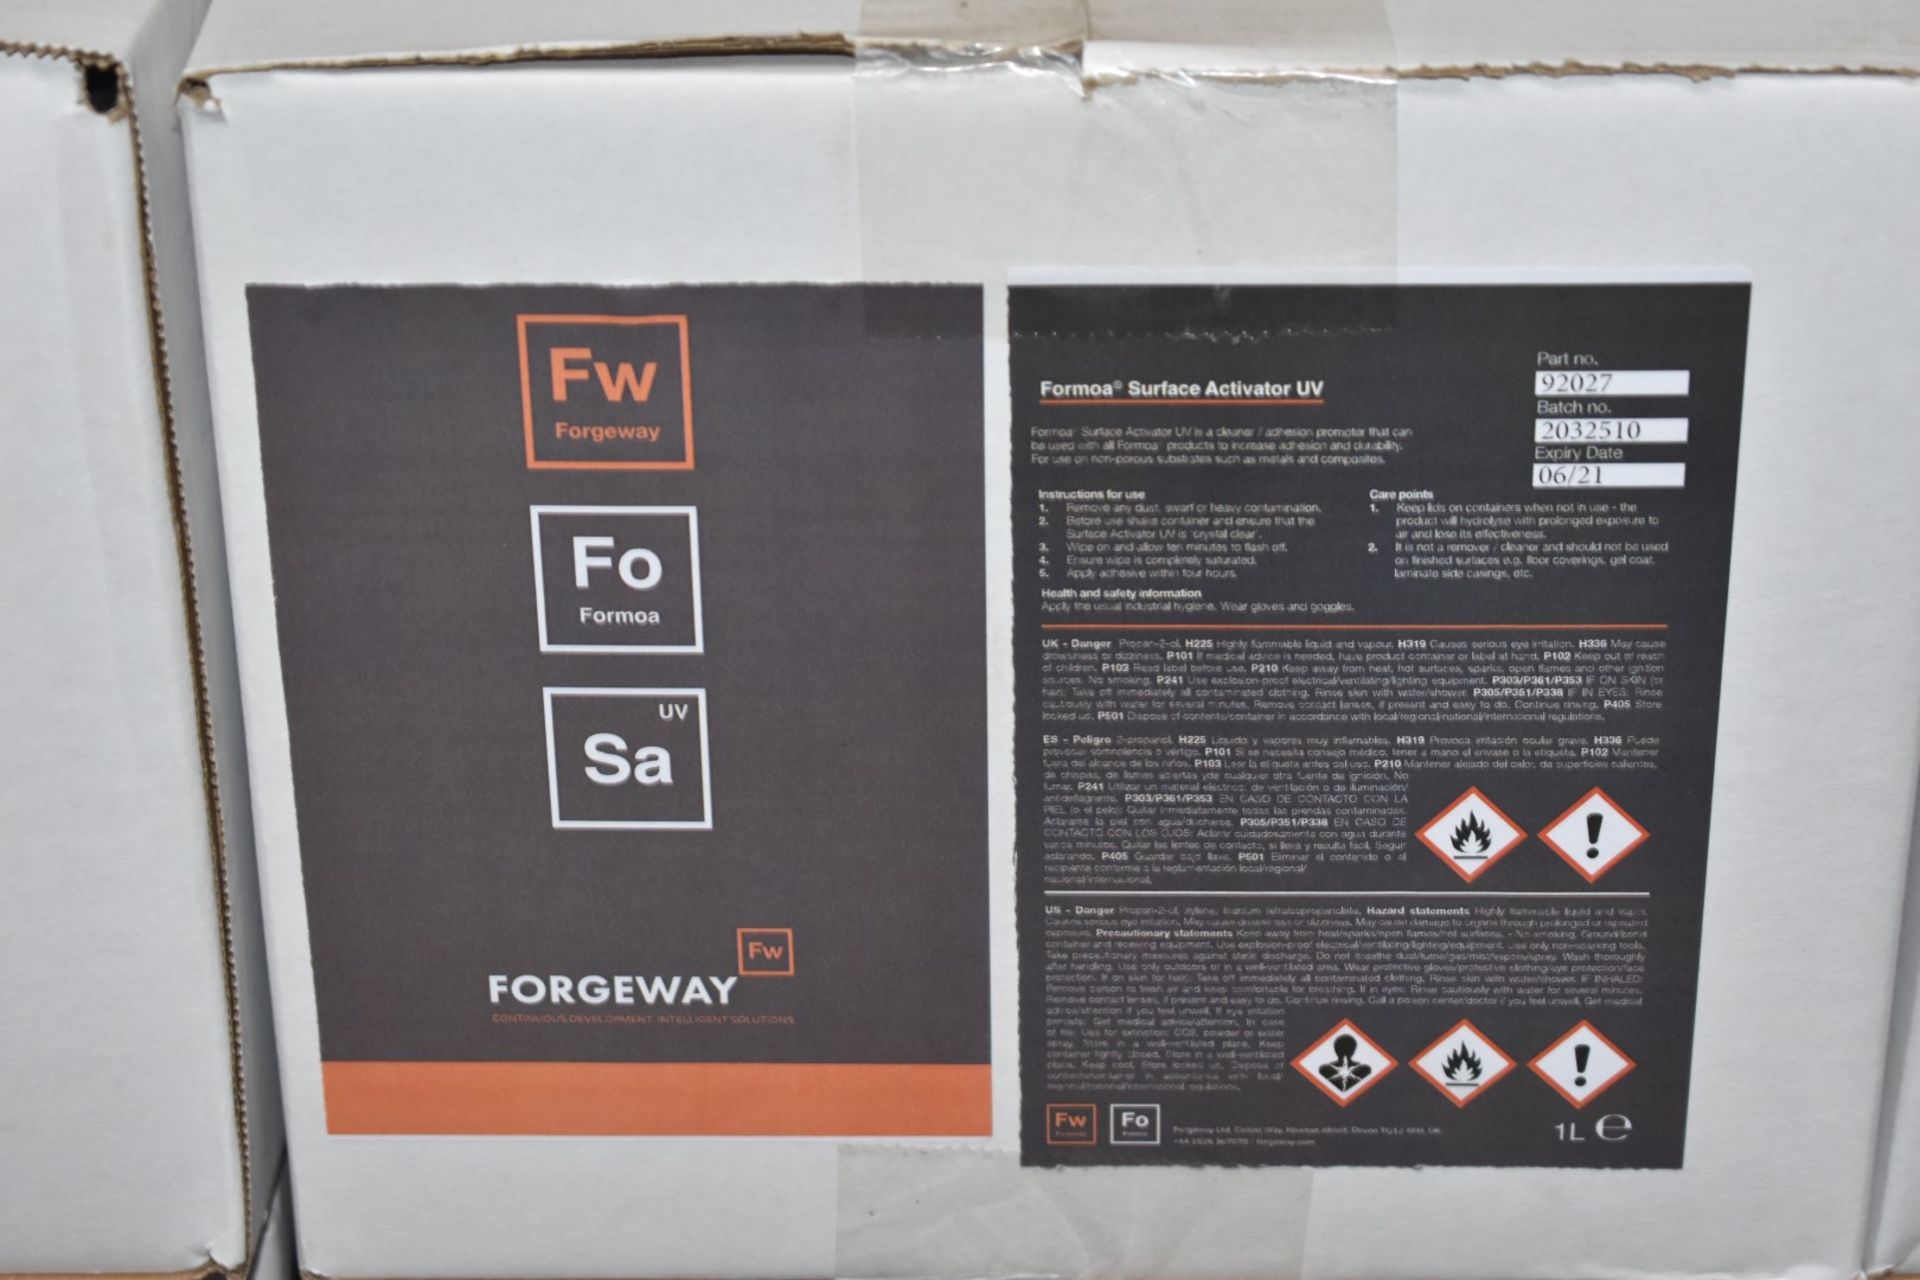 12 x Forgeway Formoa Surface Activator 1 Litre Containers - Adhesion Promotor, Cleaner, Degreaser - Image 3 of 7